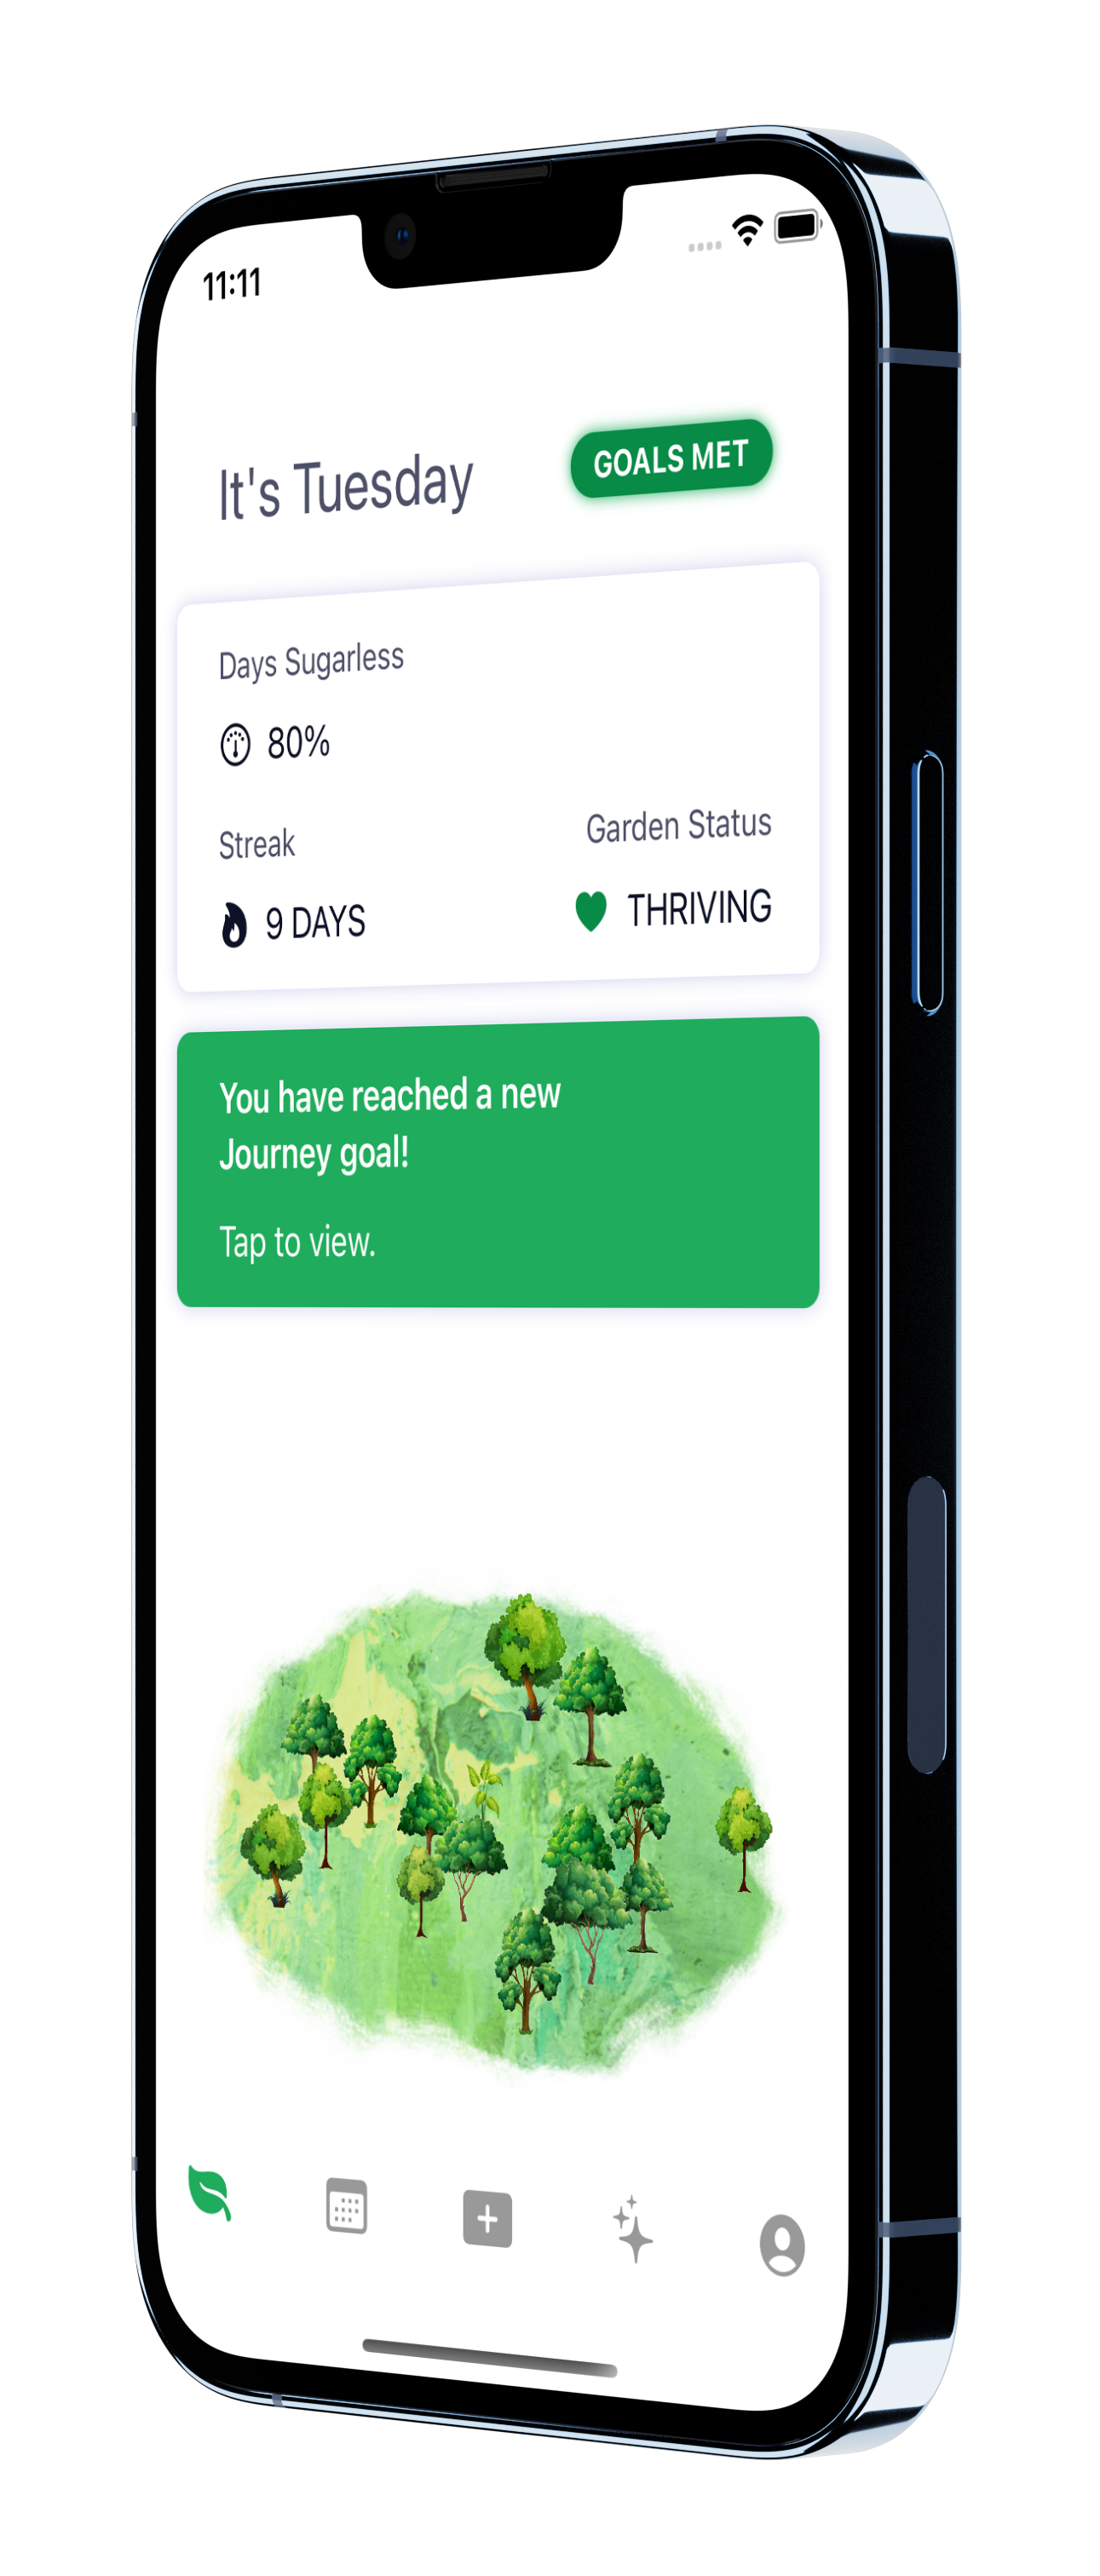 An iPhone with an app showing statistics regarding habit tracking and a lush grove of trees